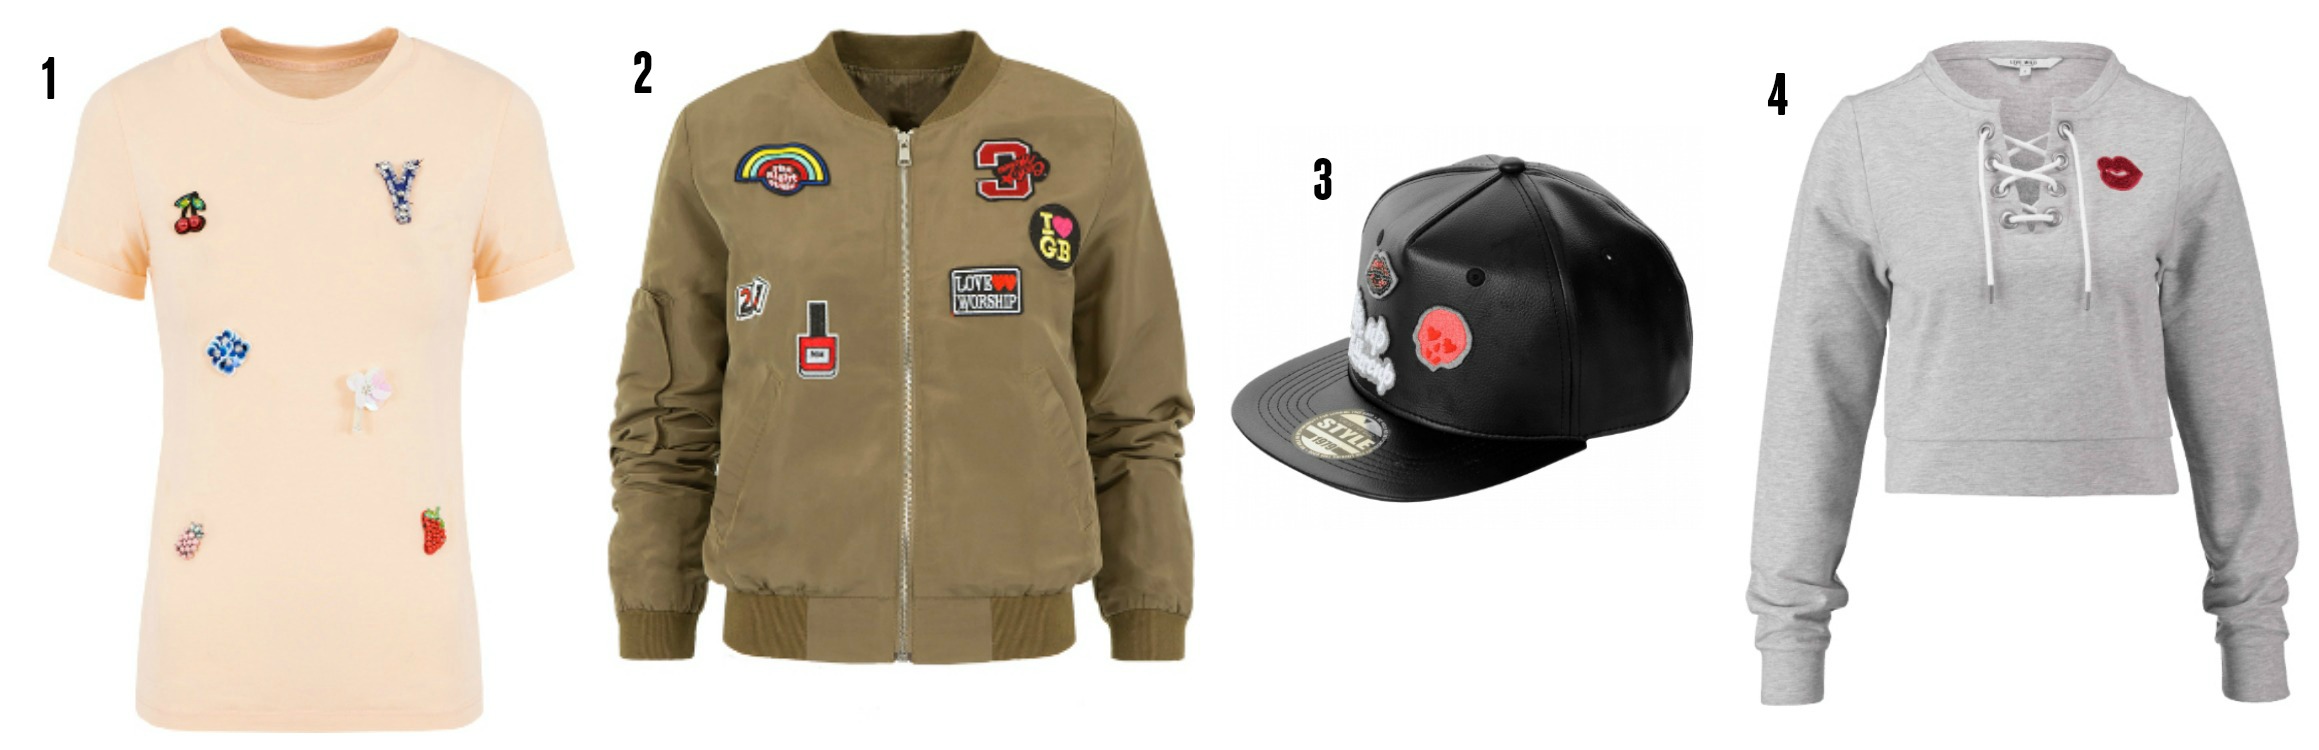 patches op kleding trend tshirt sweather cap bomber jack